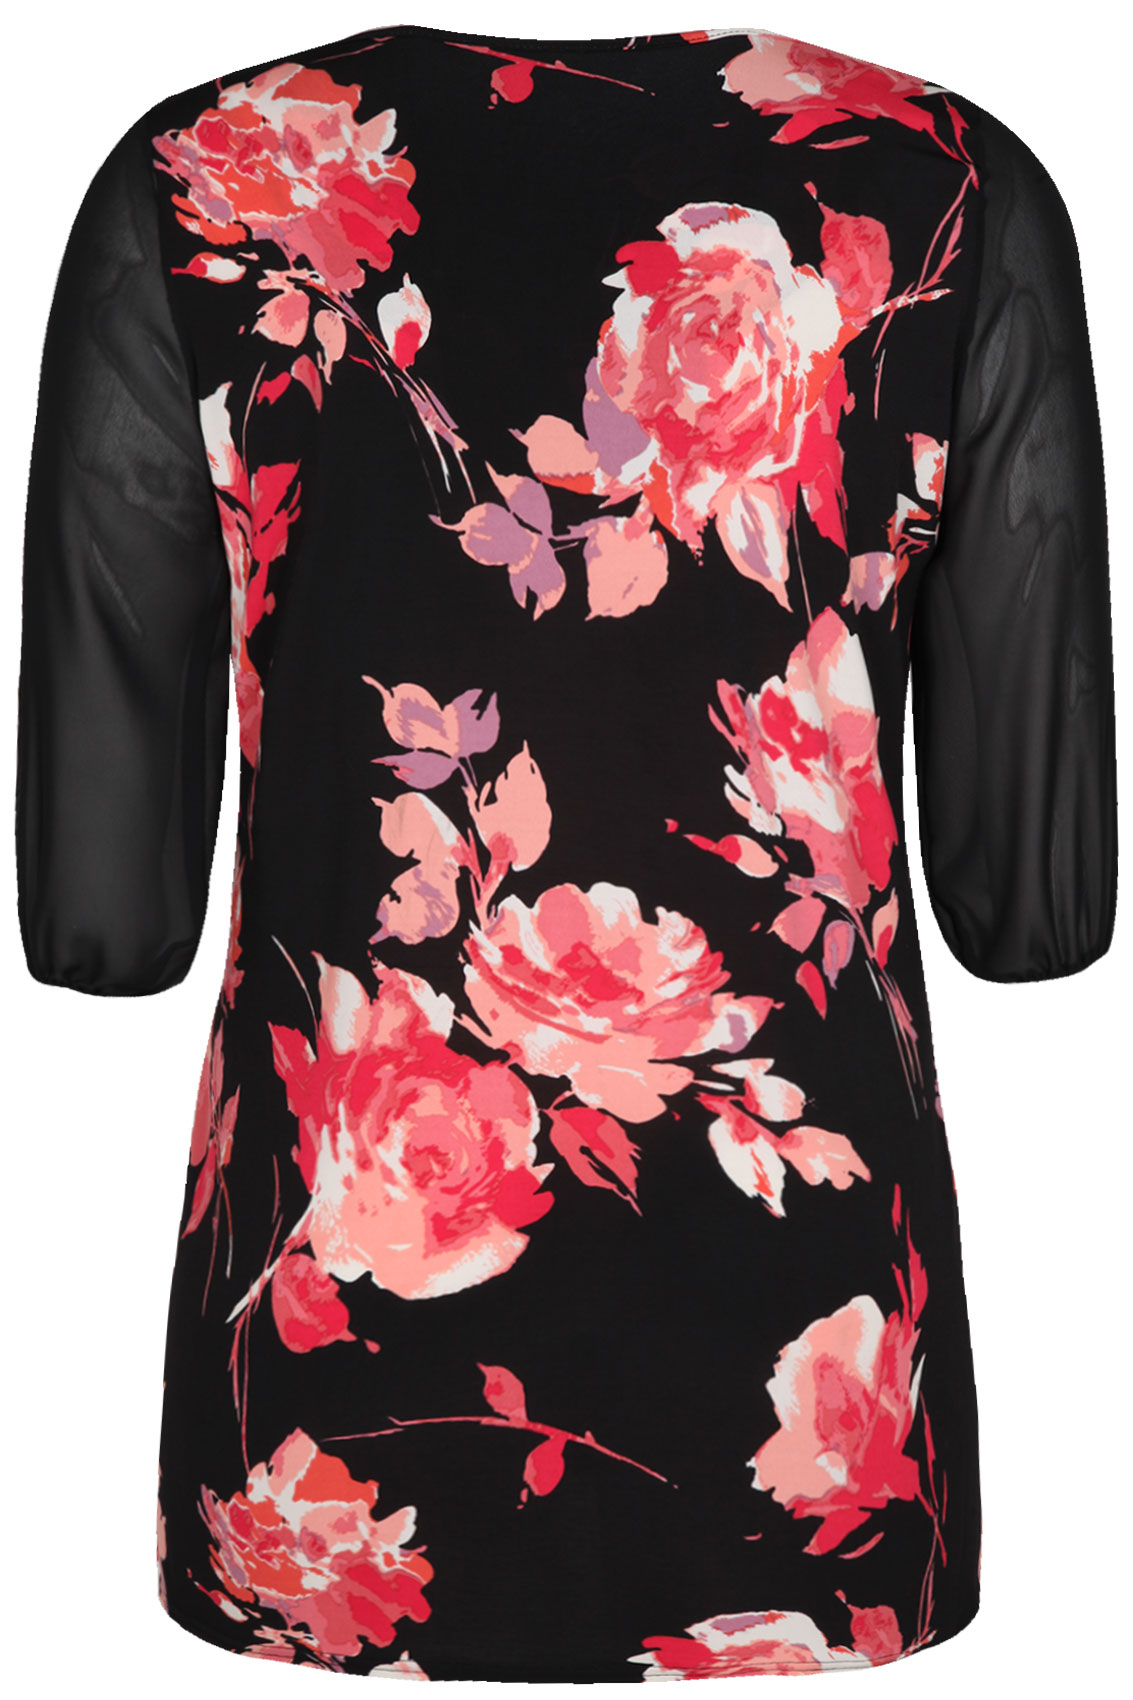 Black And Coral Floral Print Tunic With Chiffon Sleeves plus size 16,18 ...